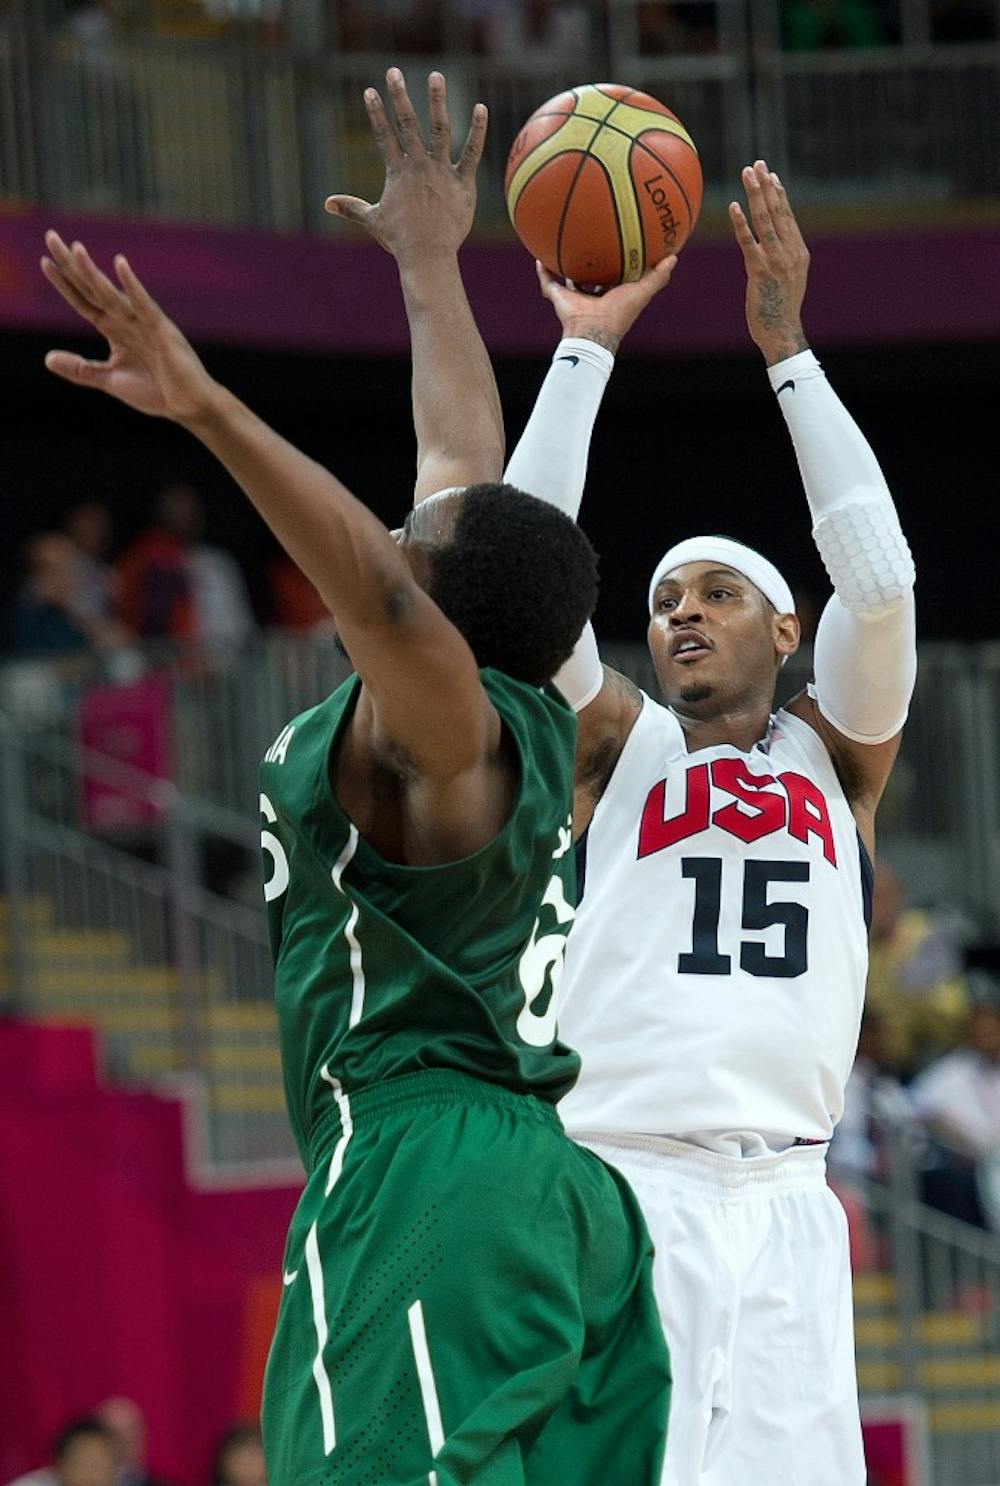 USA's Carmelo Anthony (15) scores over Nigeria's Ike Diogu (6) during their game at the Olympic Park Basketball Arena during the 2012 Summer Olympic Games in London, England, Thursday, August 2, 2012. (Harry E. Walker/MCT)